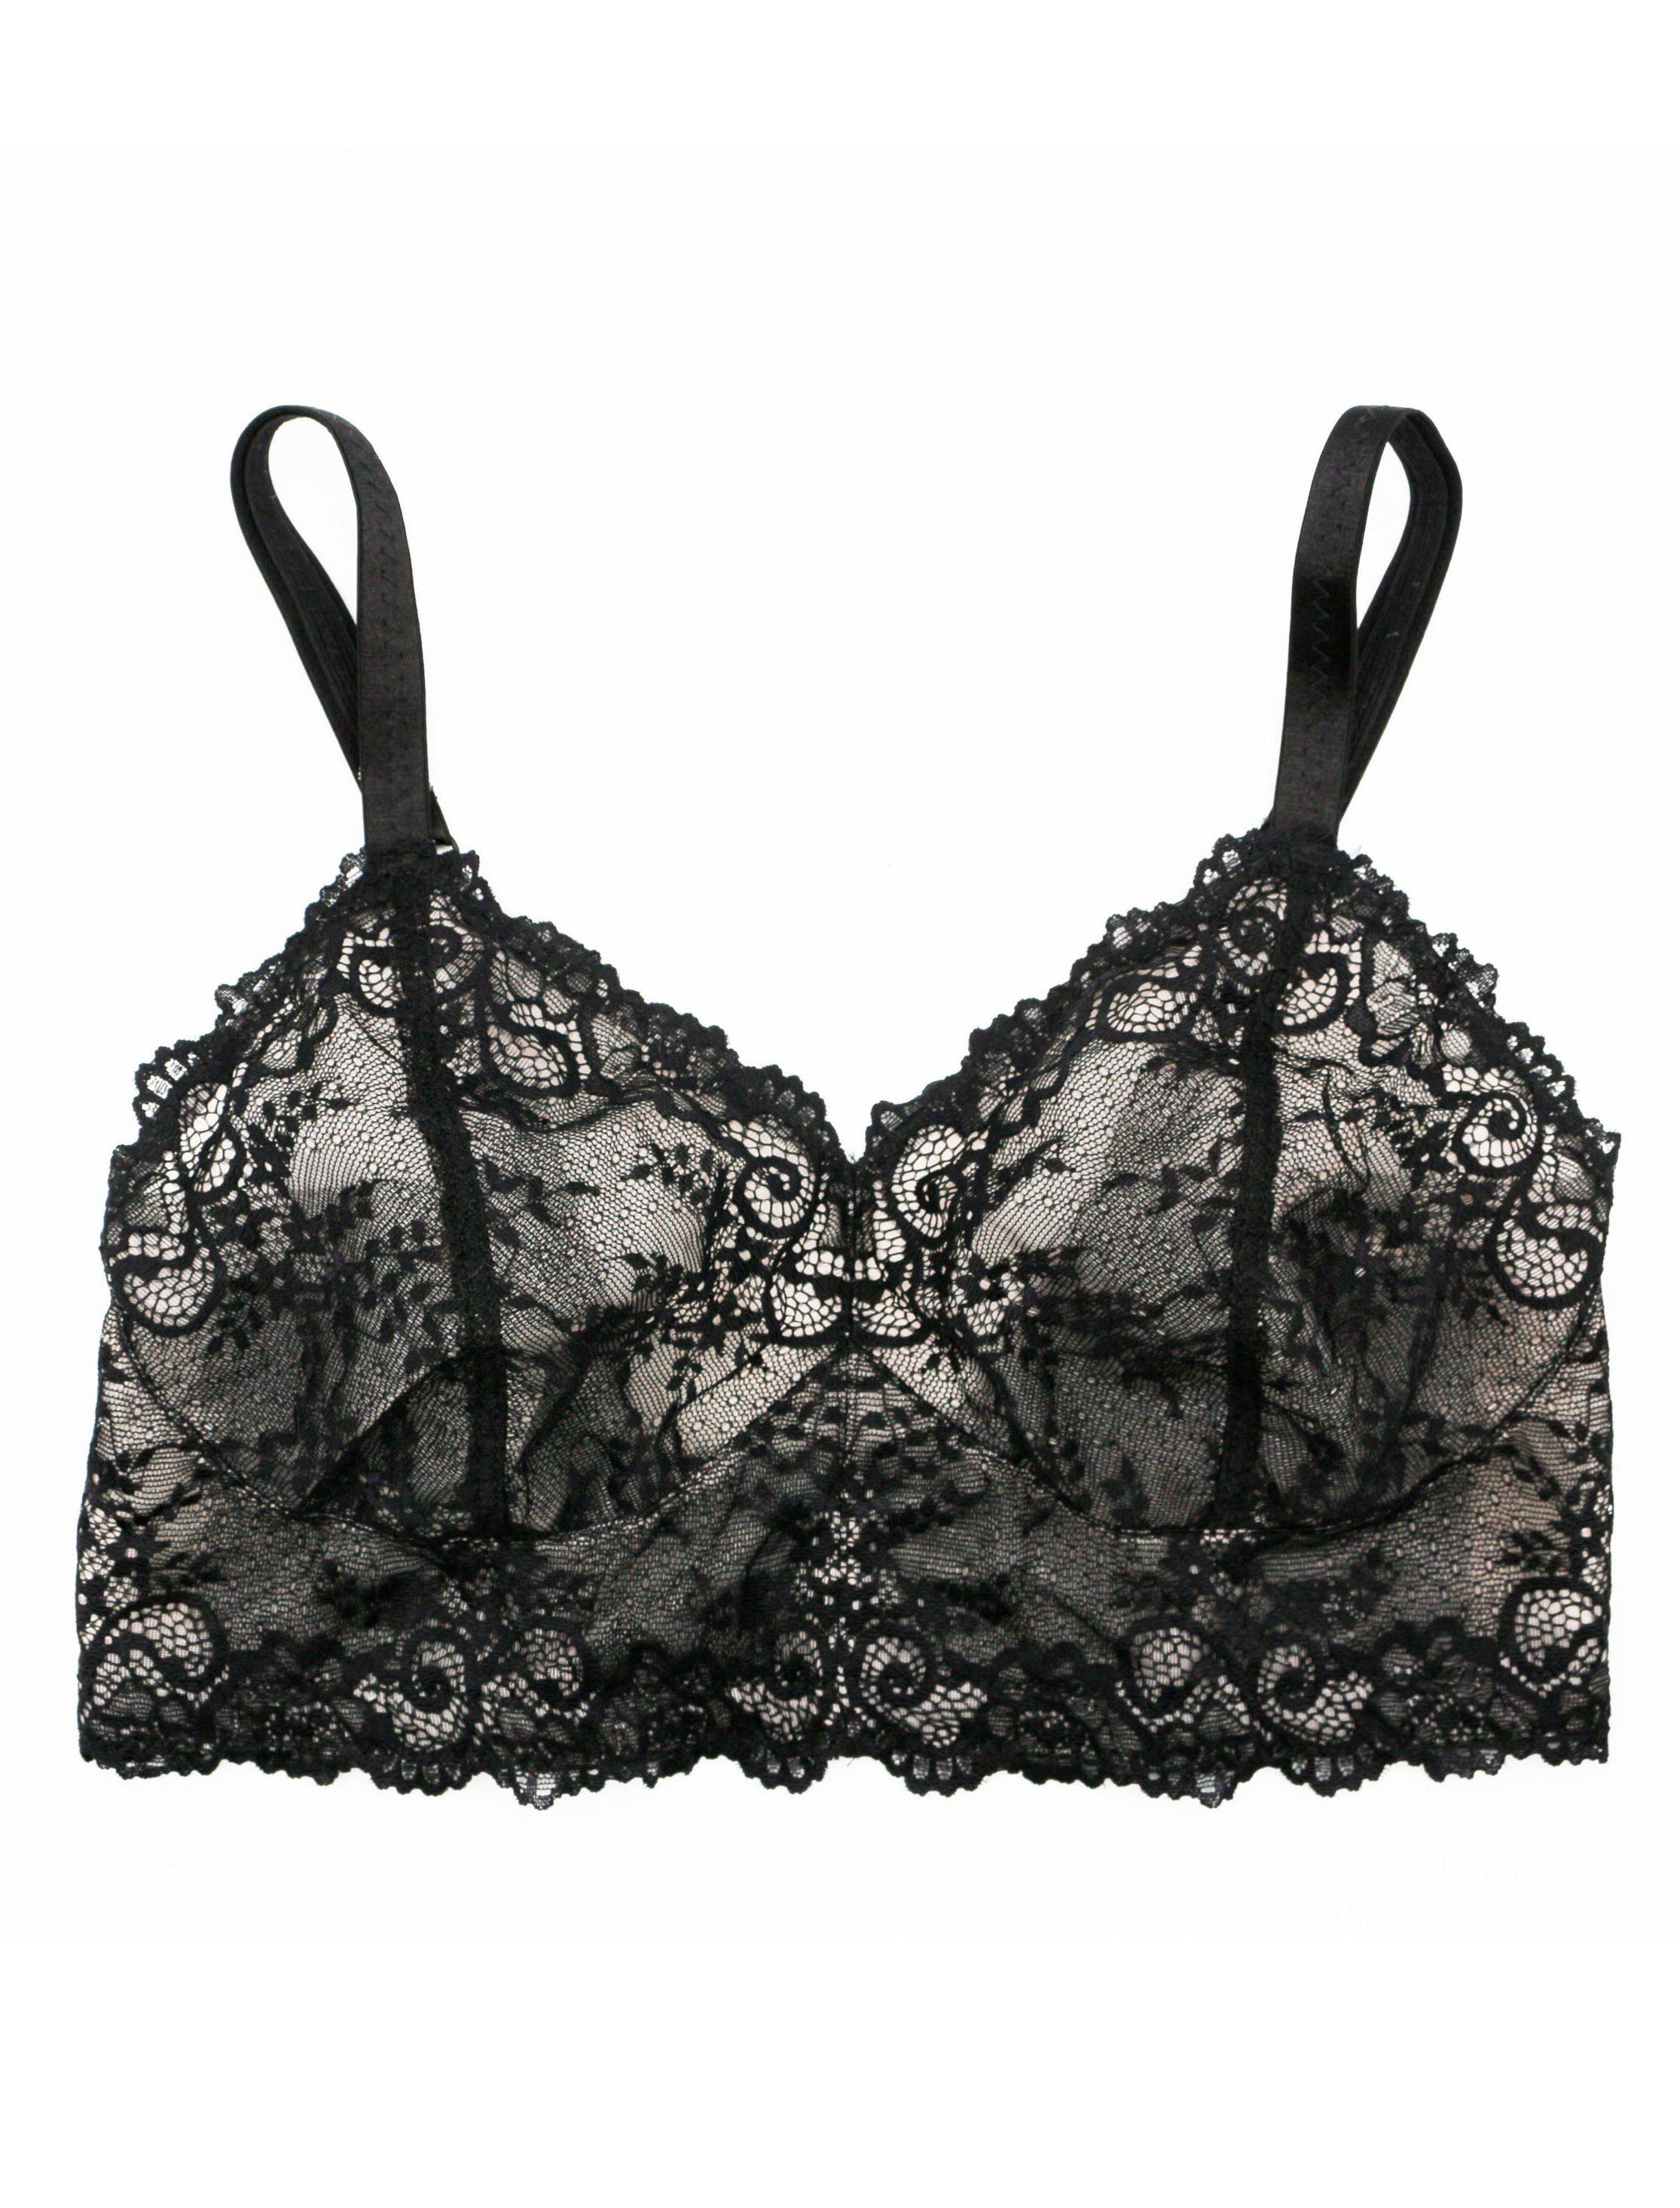 Custom made wireless bra in black scalloped lace fabric made to order by Rubies Bras.